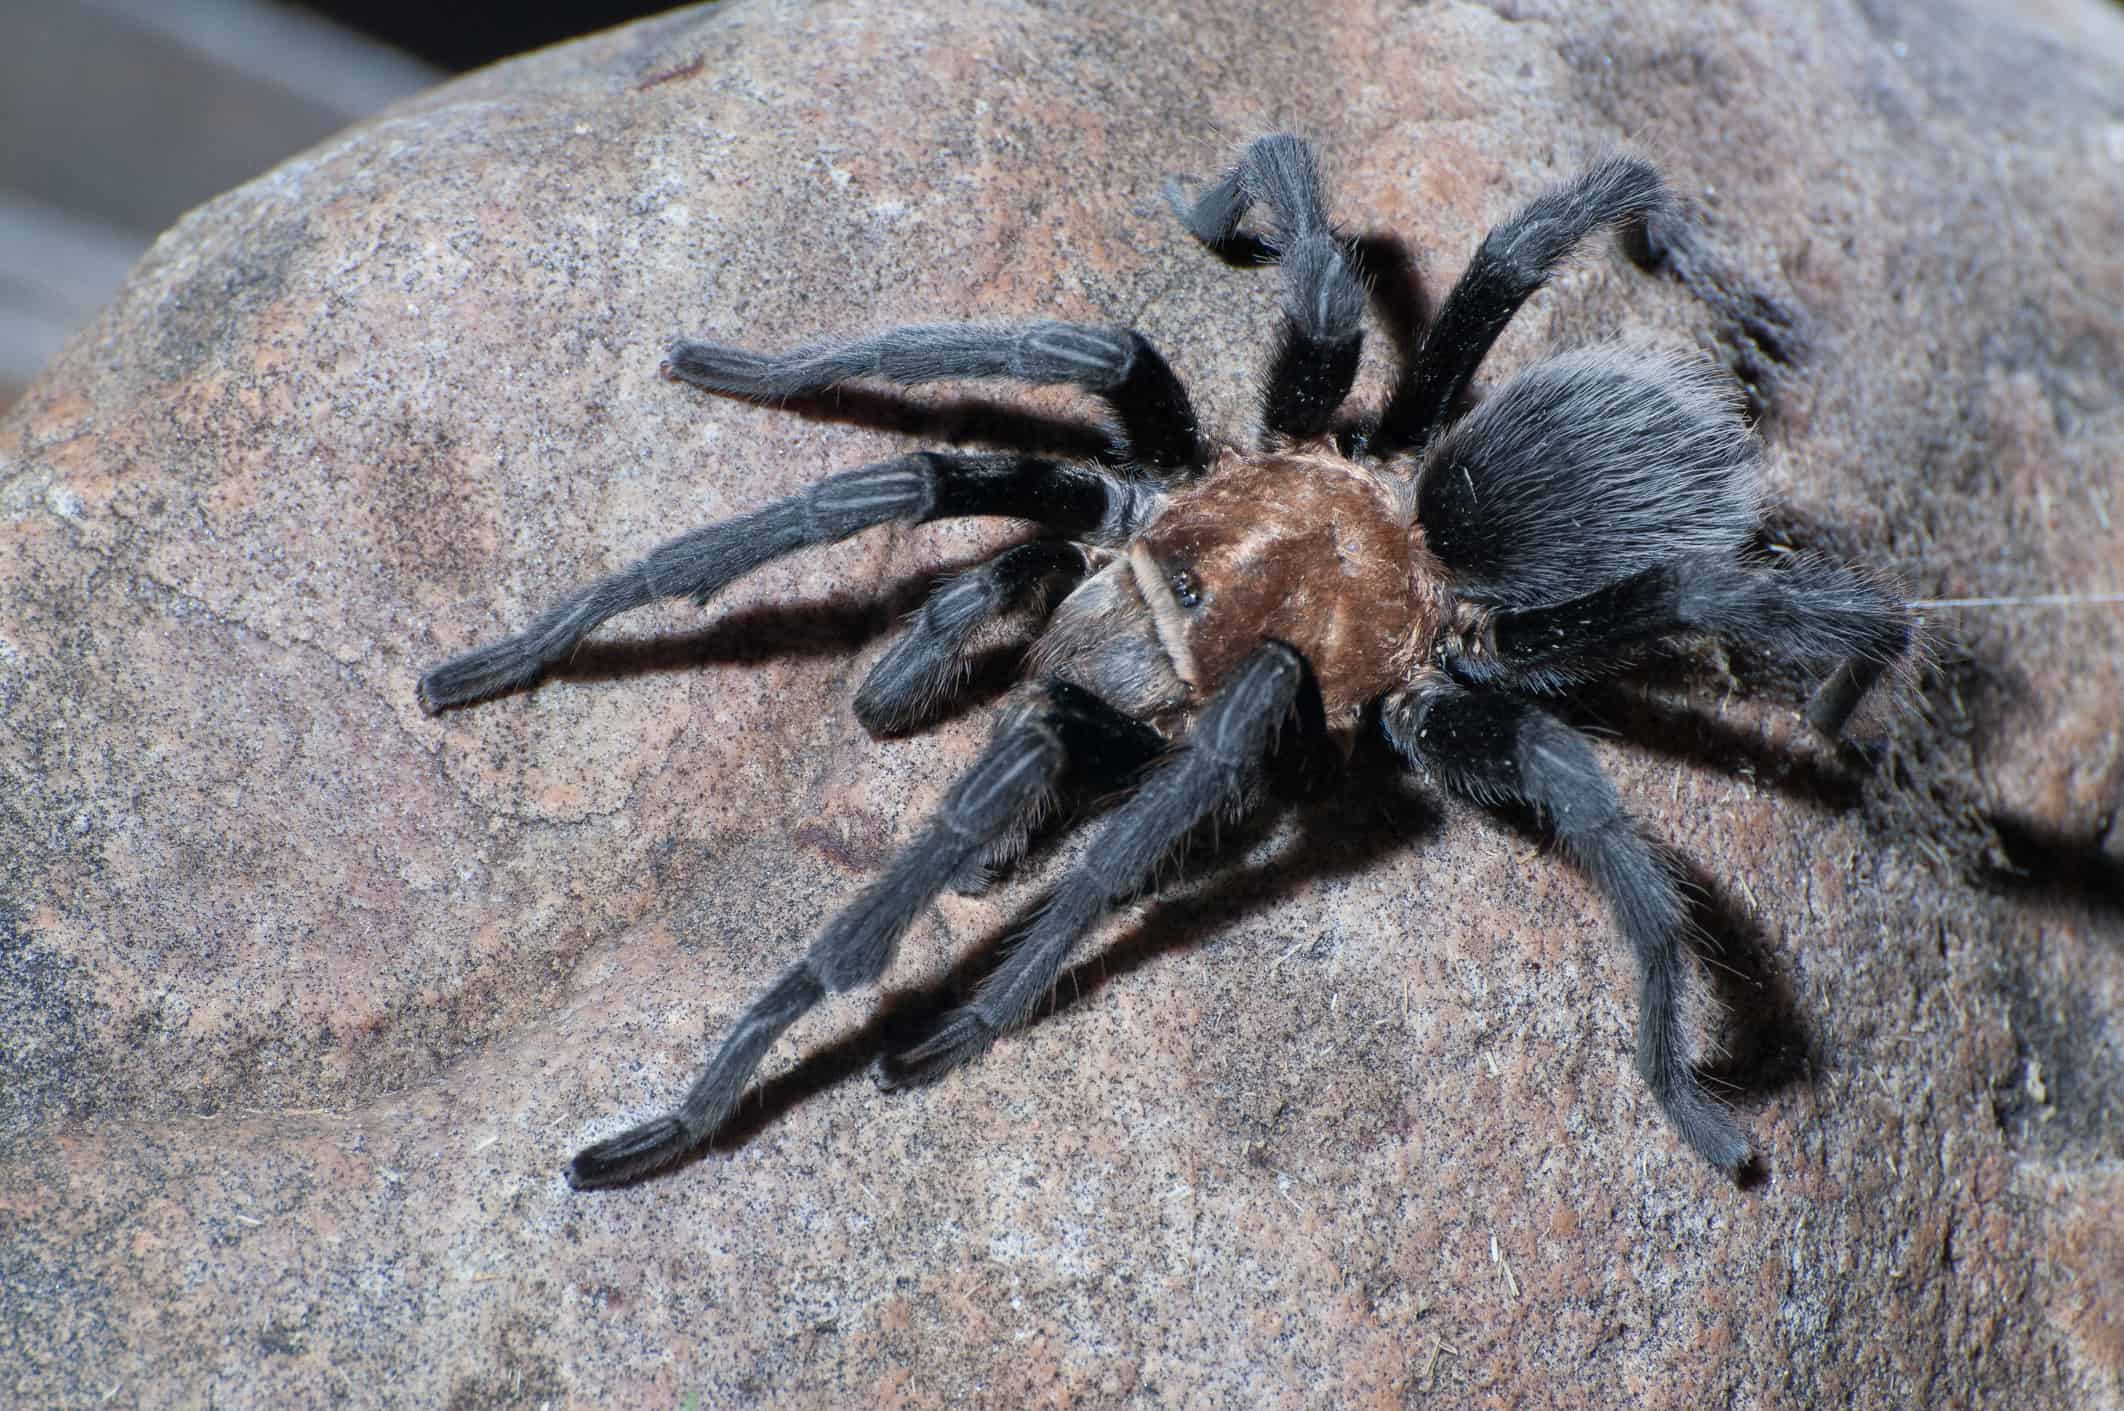 Bluefront tarantula on a brown surface.